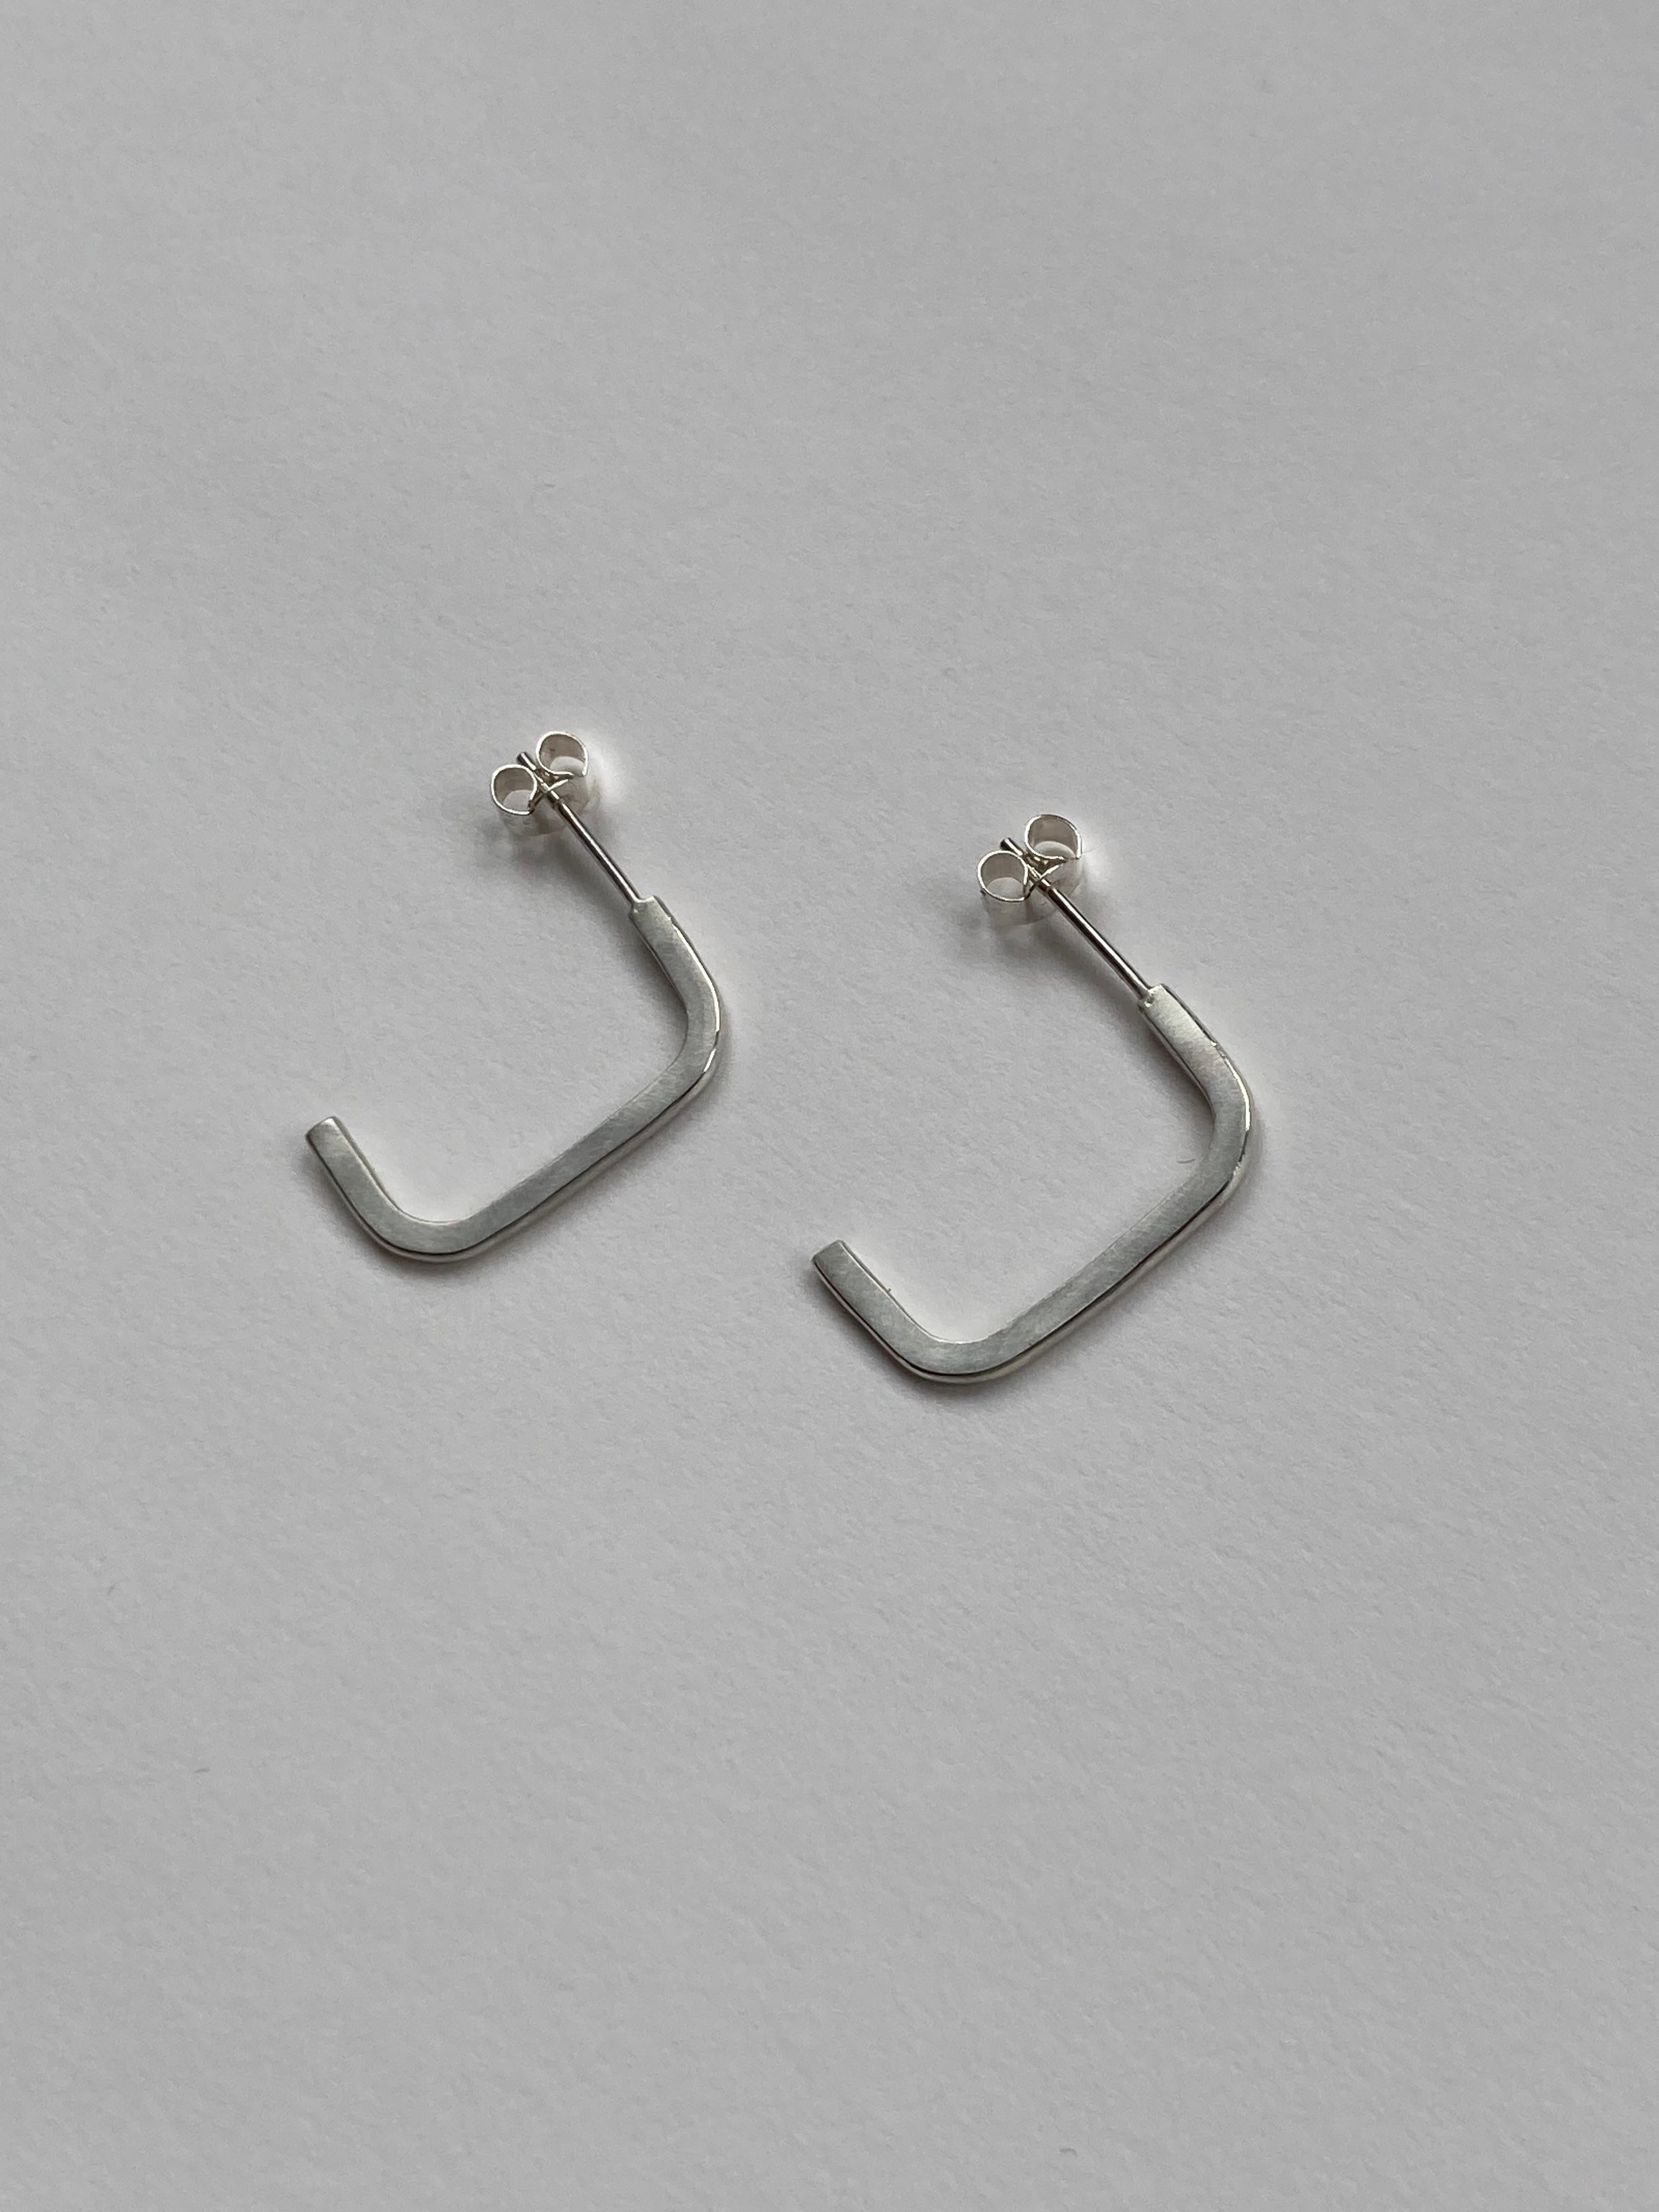 Elegant stud earrings made from forged wire, formed into a half folded square. 

The polished inside surface catches the light when worn. 

They are secured to the ear with a classic butterfly back, and are a comfortable weight for everyday wear.